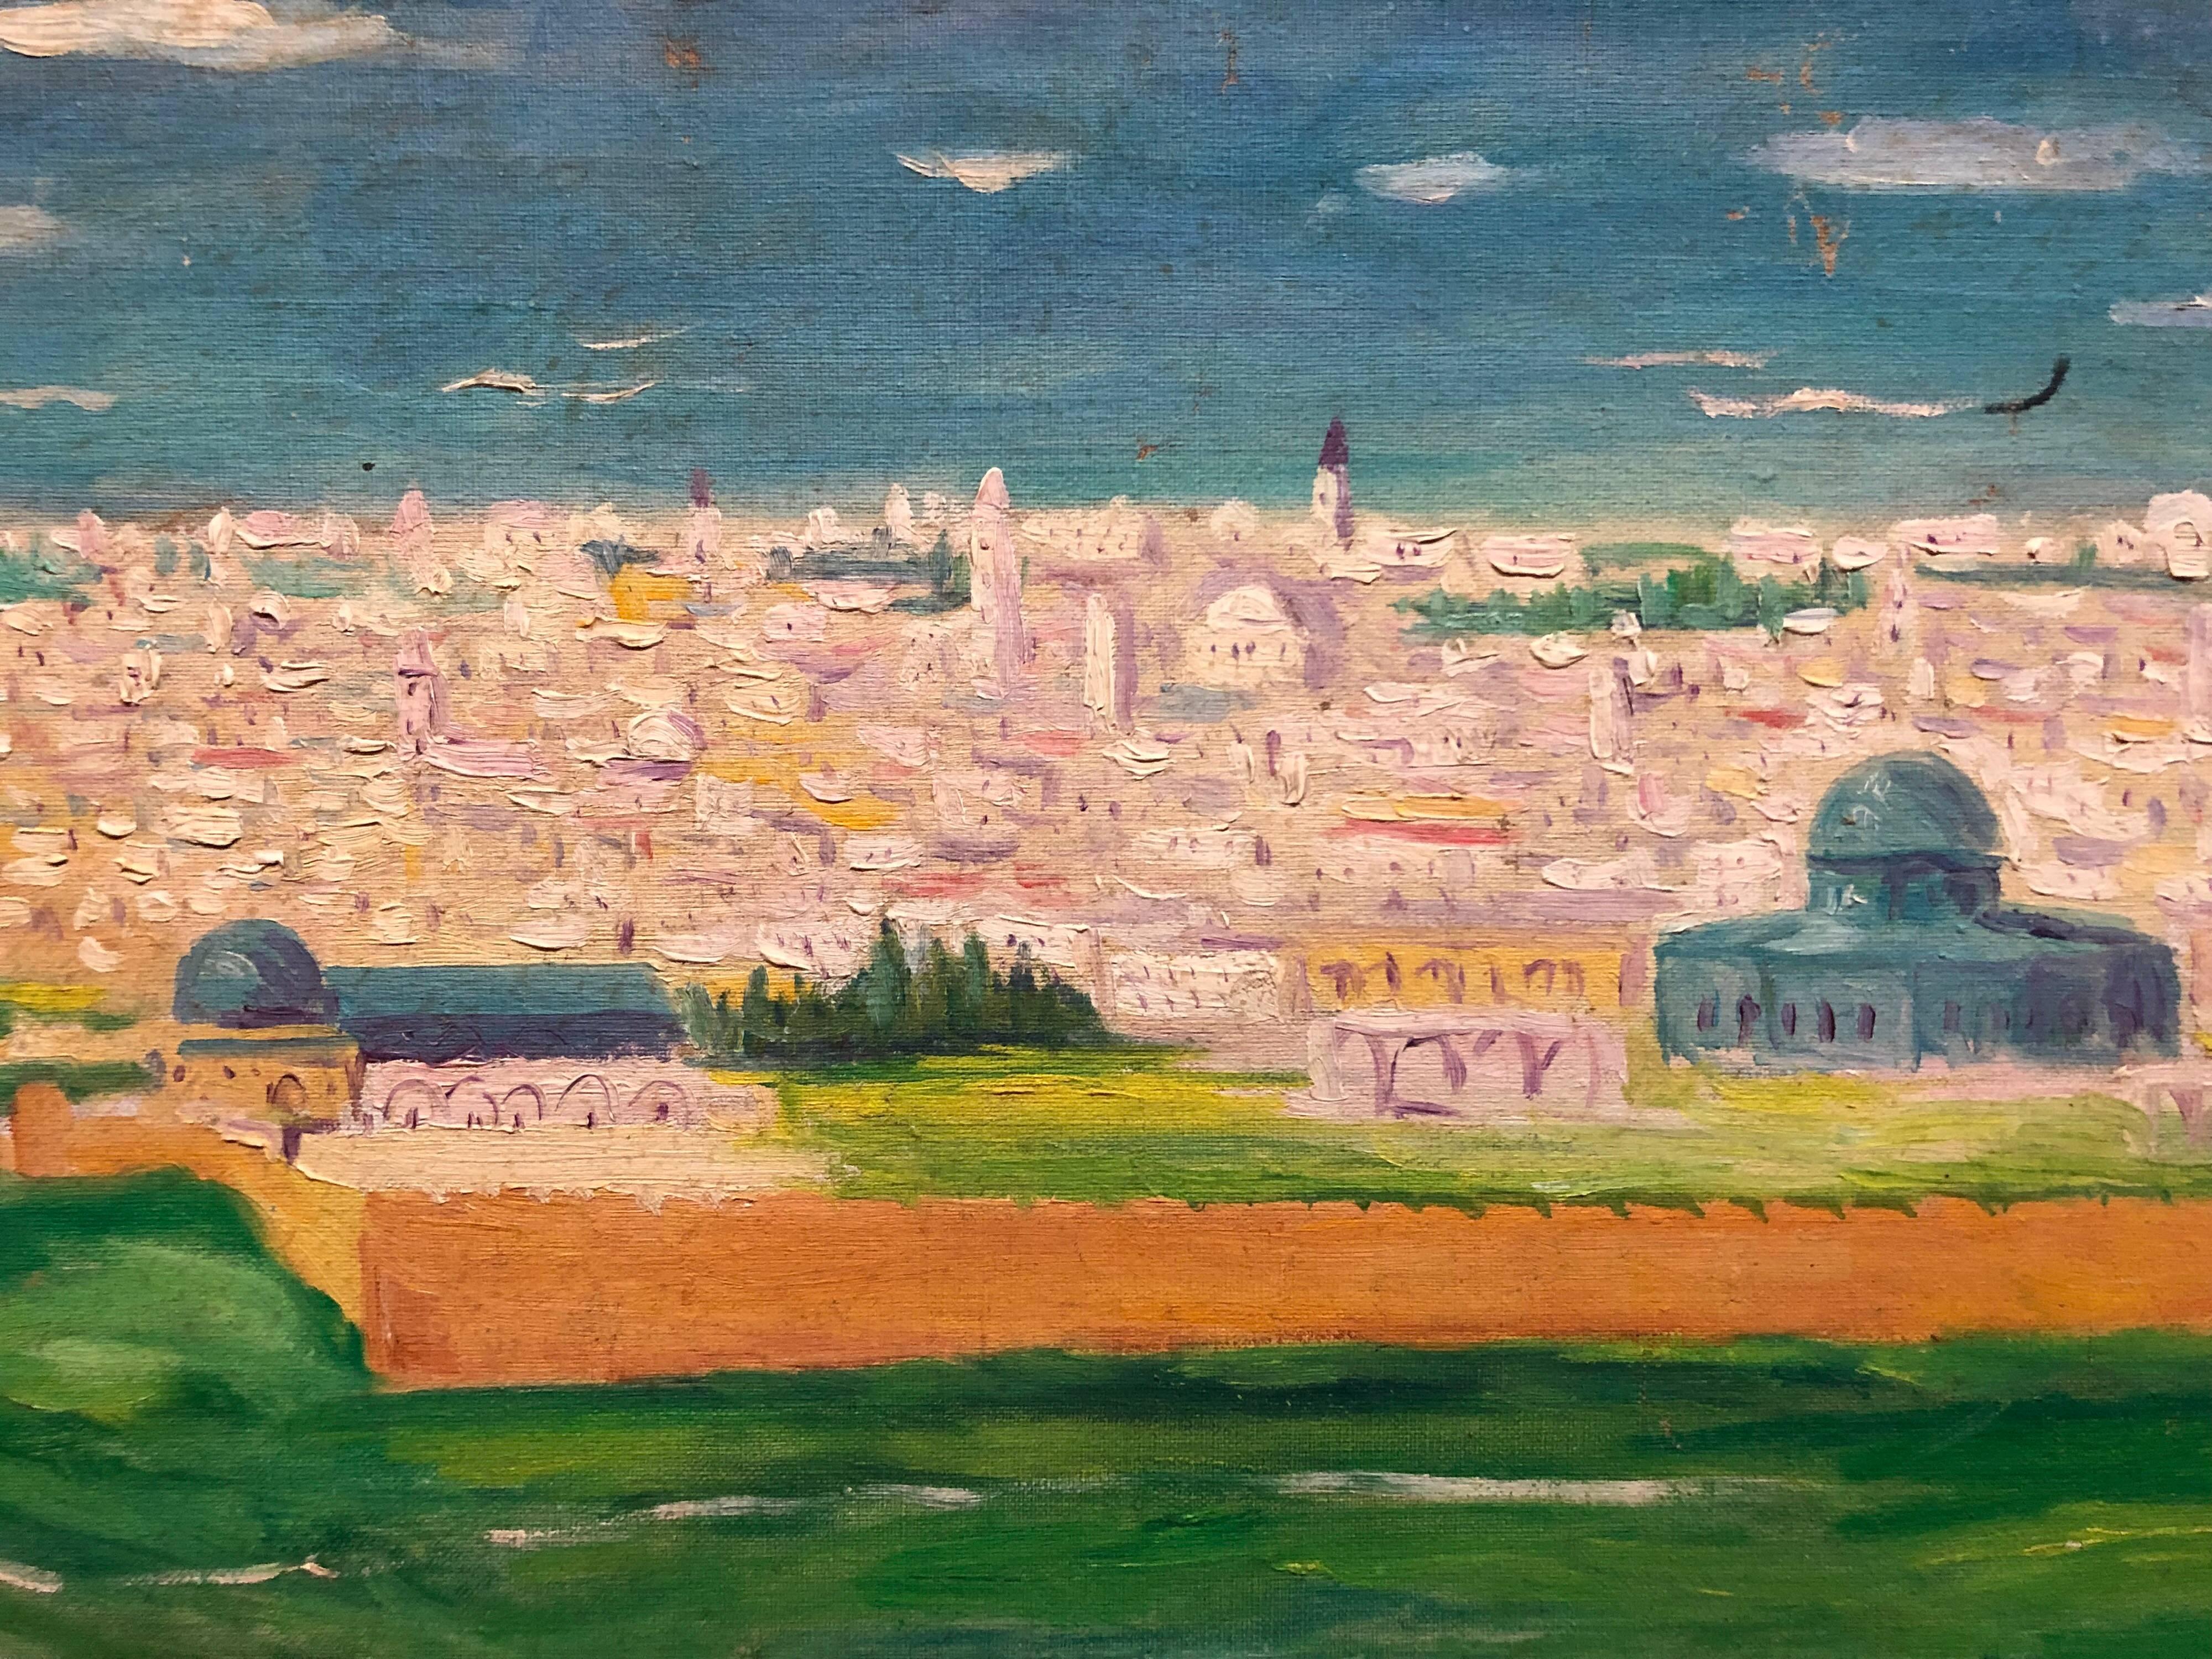 German-Israeli artist ARYE LEO PEYSACK (1894-1972). Peysack was born in 1894 and trained in Germany. He immigrated to Palestine in the early 1920s, traveled extensively around the country and captured the landscapes of the Holy Land and its people.